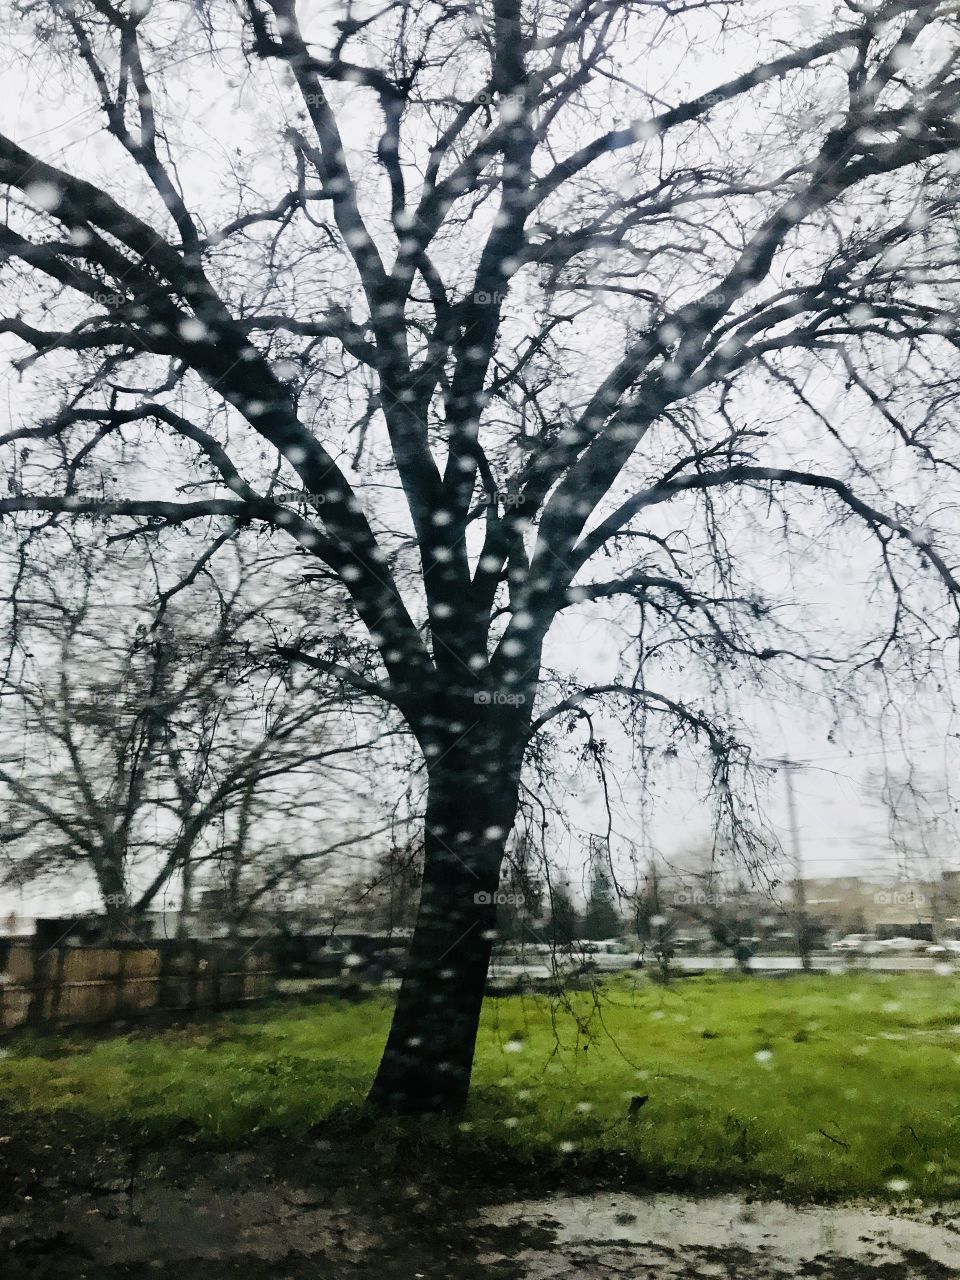 Looking out side the window of the car at the wooden tree in the rain storm and the bright green grass. USA, America 